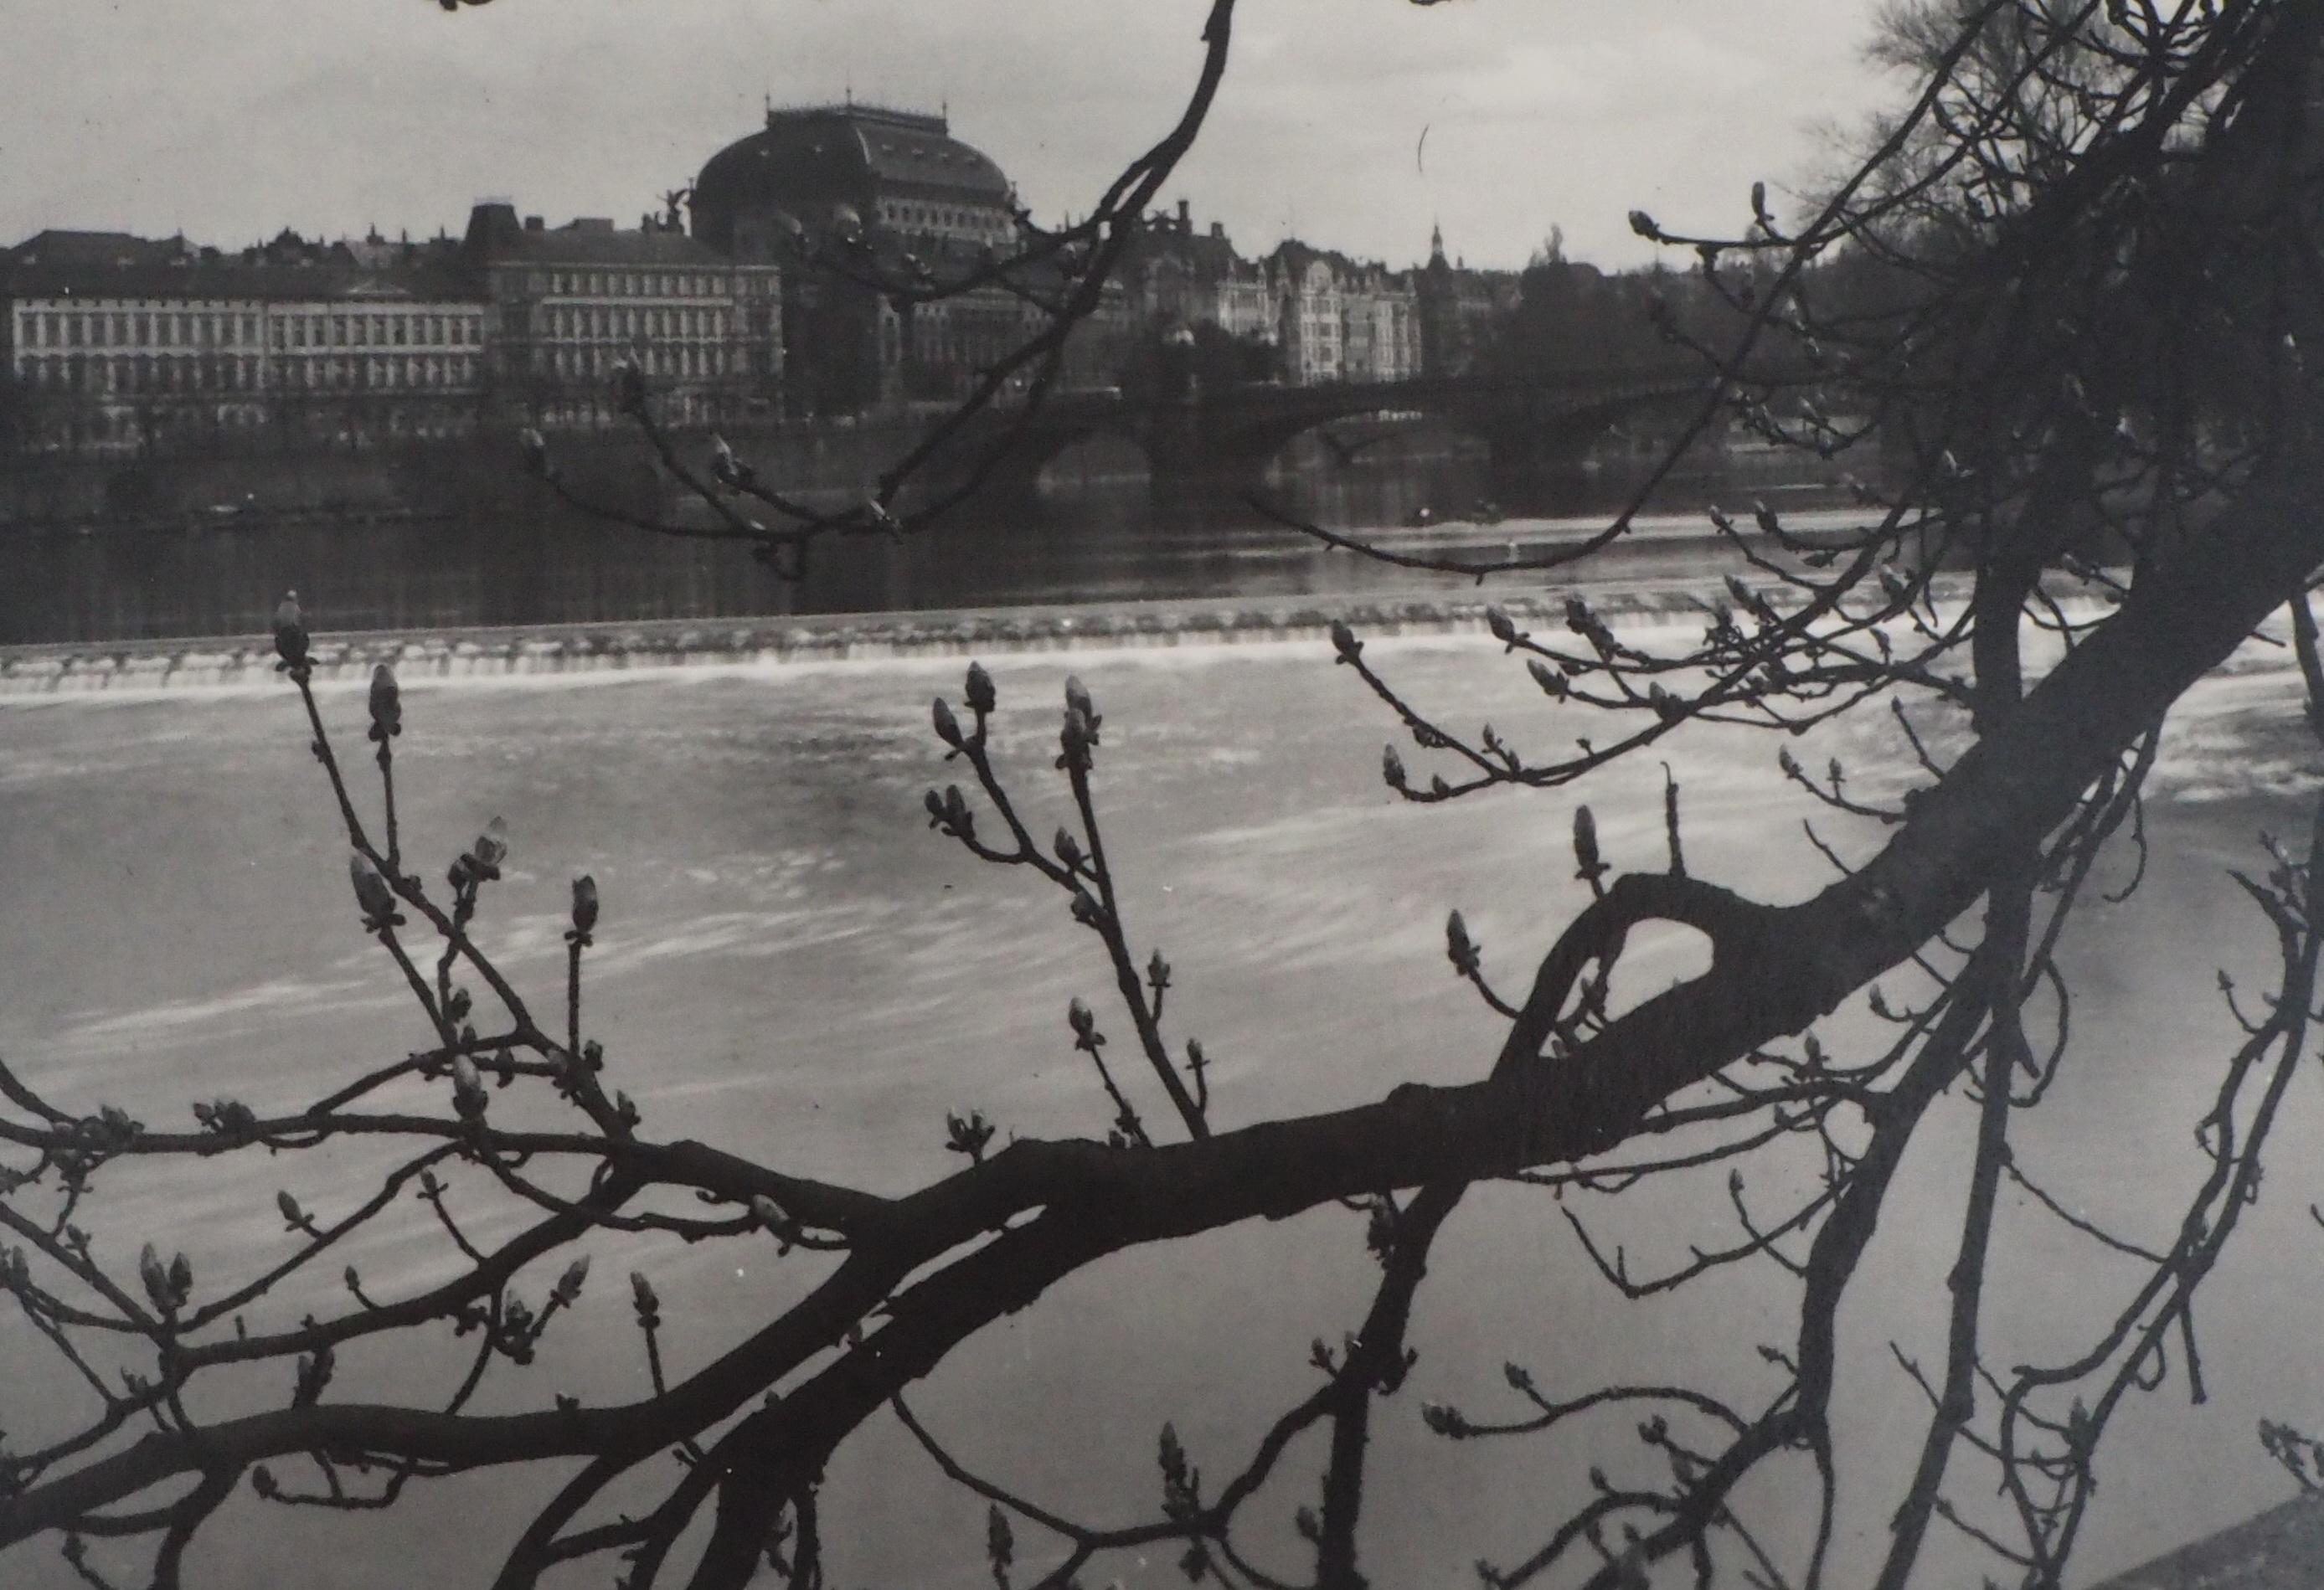 Josef Sudek
Prague : National Theatre, 1963

Original gelatin silver print
Hand signed in pencil in the lower right corner (see picture)
17 x 23 cm (c. 6.7 x 9 in)
Countersigned, dated and dedicated on the back (see picture)

INFORMATION : This